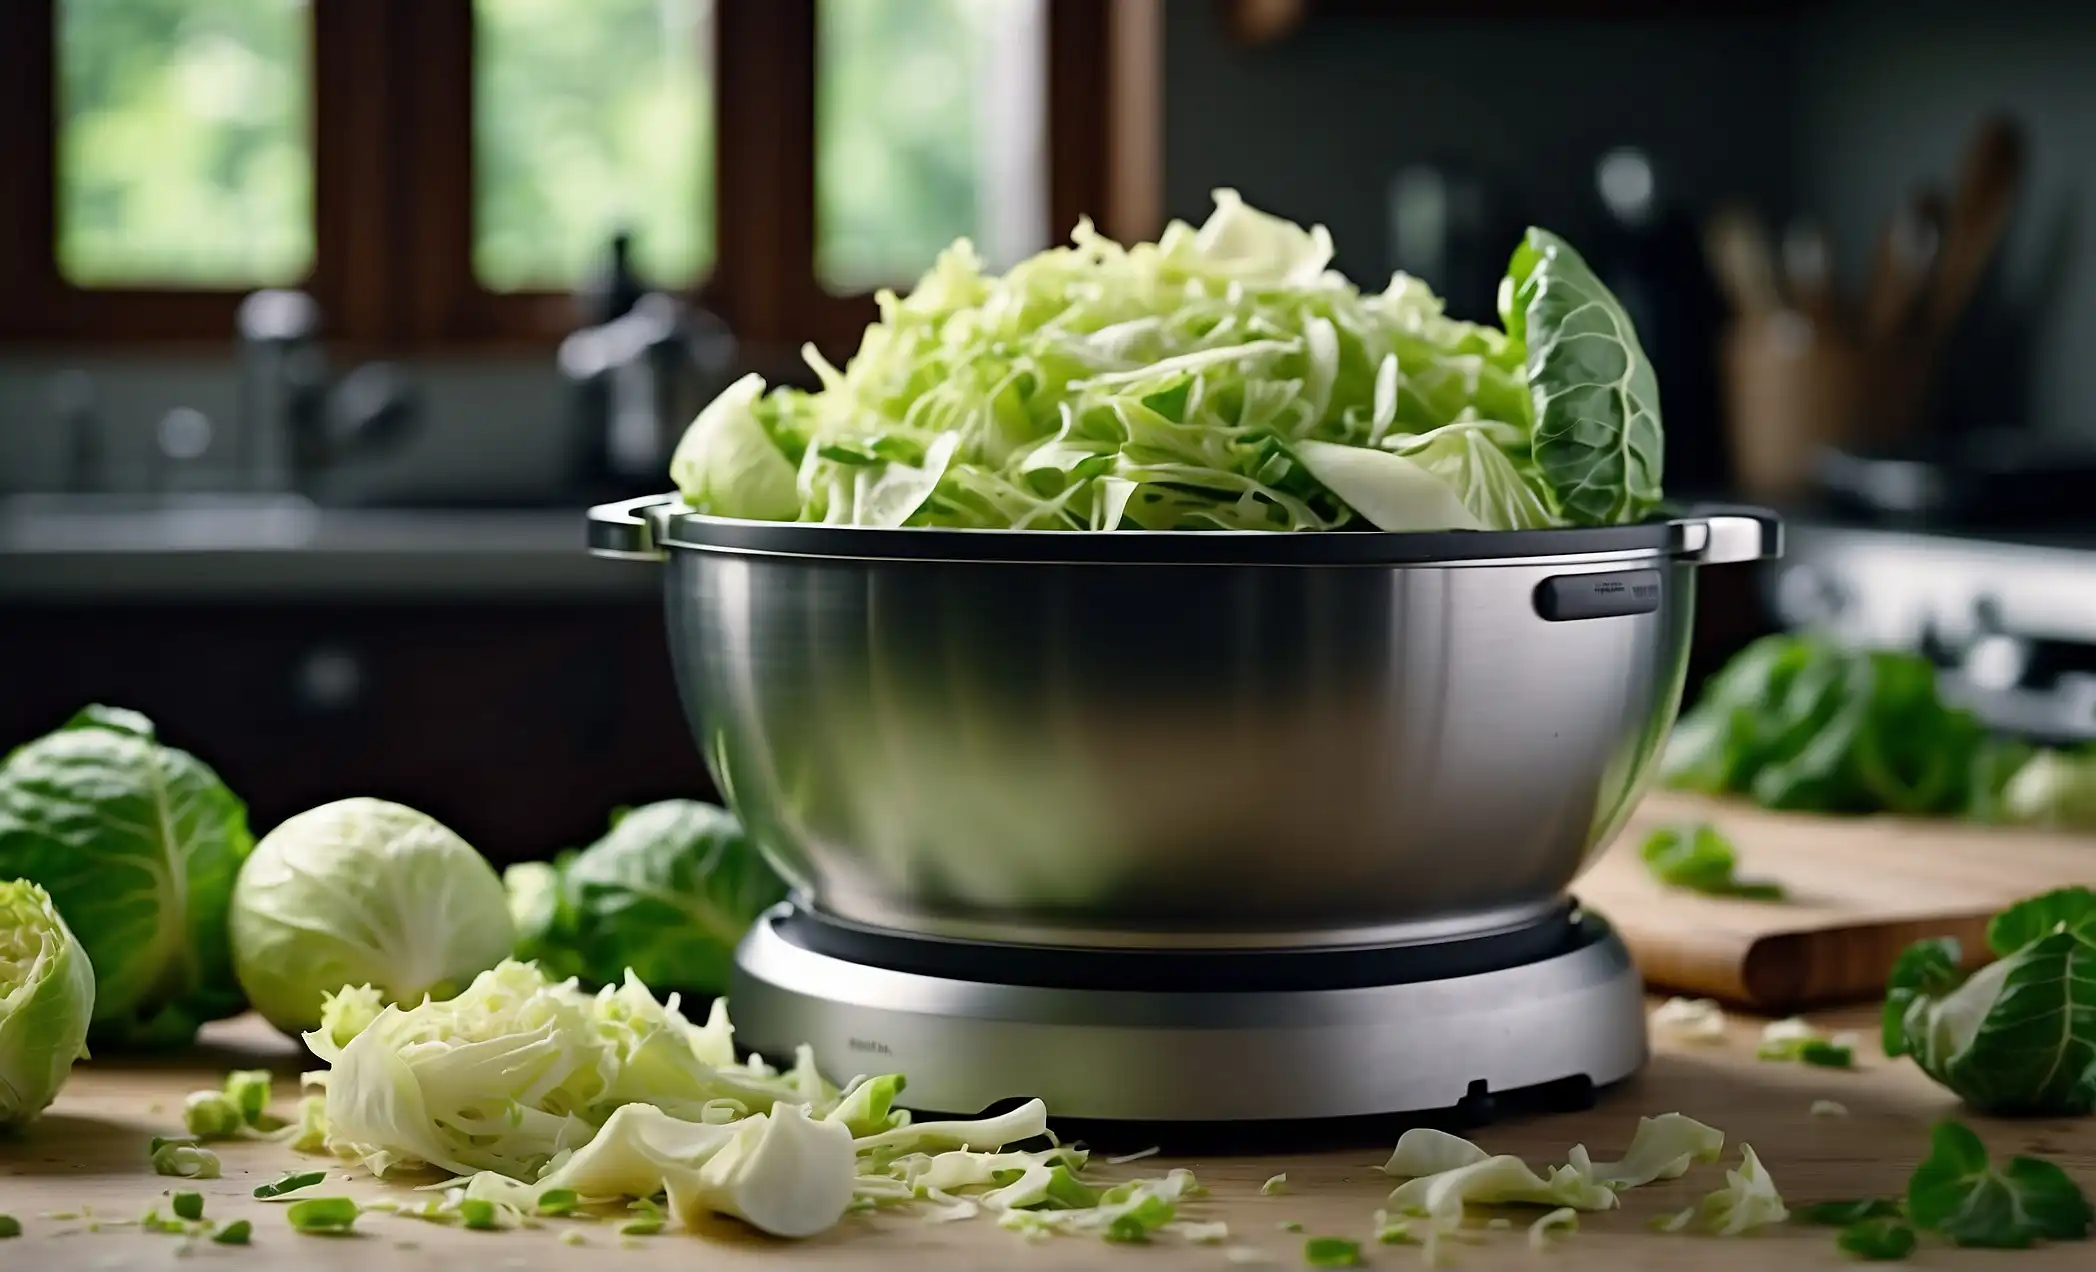 https://farmpioneer.com/wp-content/uploads/2023/12/How-to-Shred-Cabbage-in-Food-Processor.webp